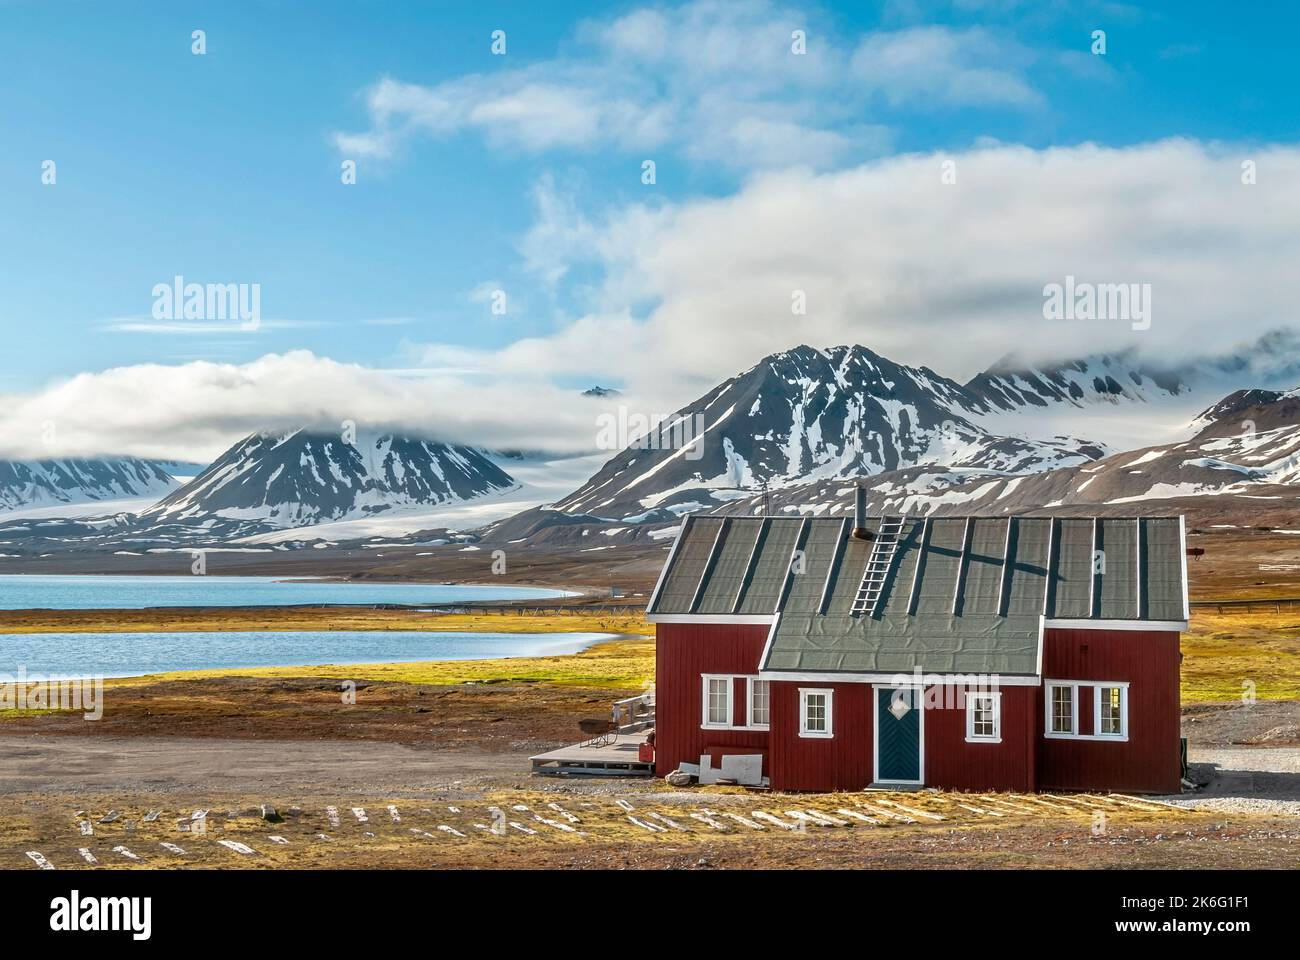 Single wooden house in a minimalist arctic landscape at Svalbard, Norway Stock Photo